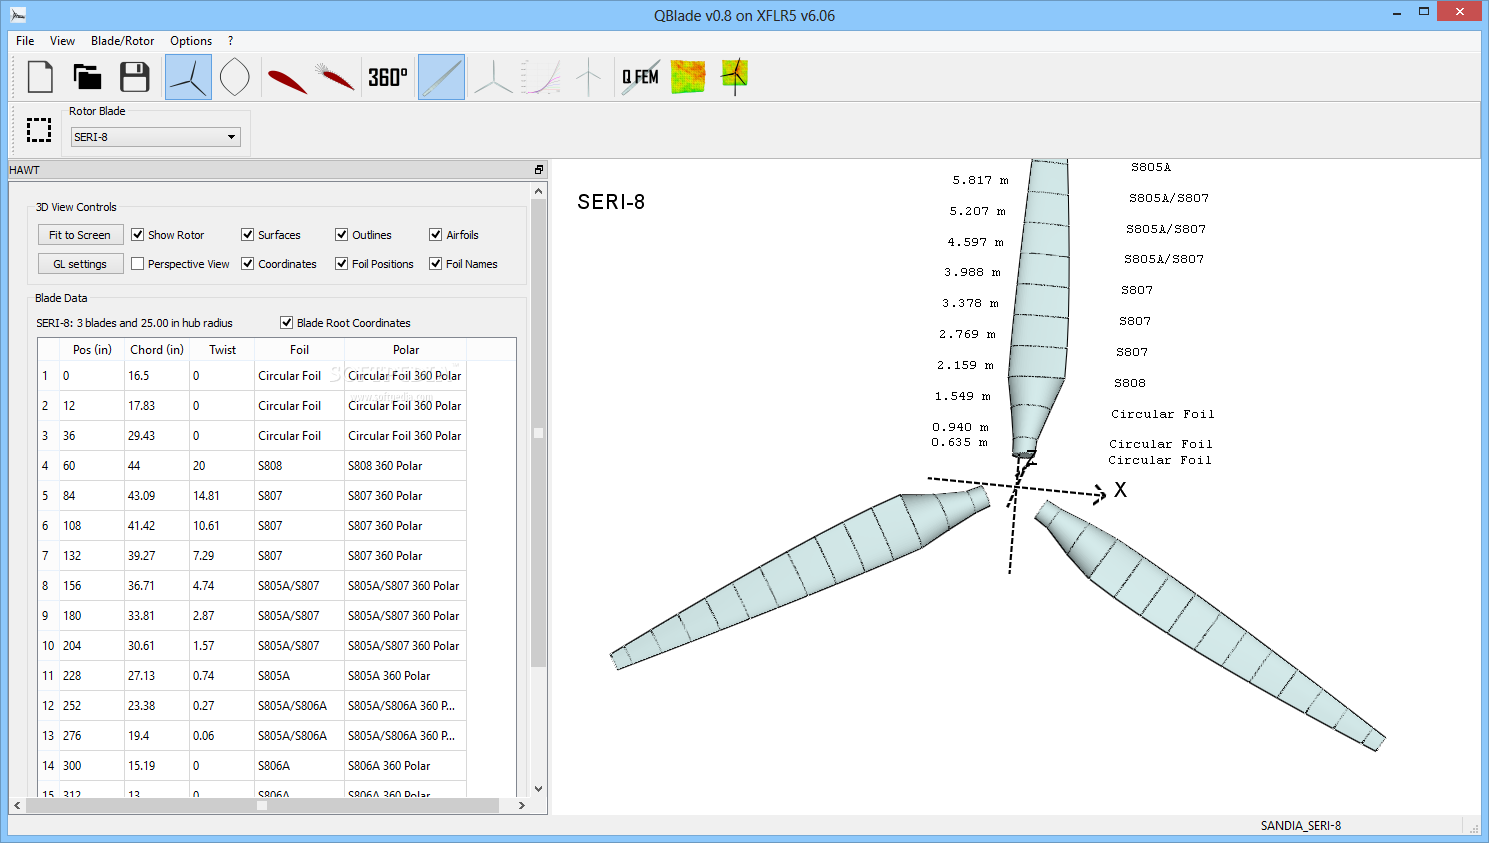 QBlade - You can visualize the rotor blade in 3D, together with 